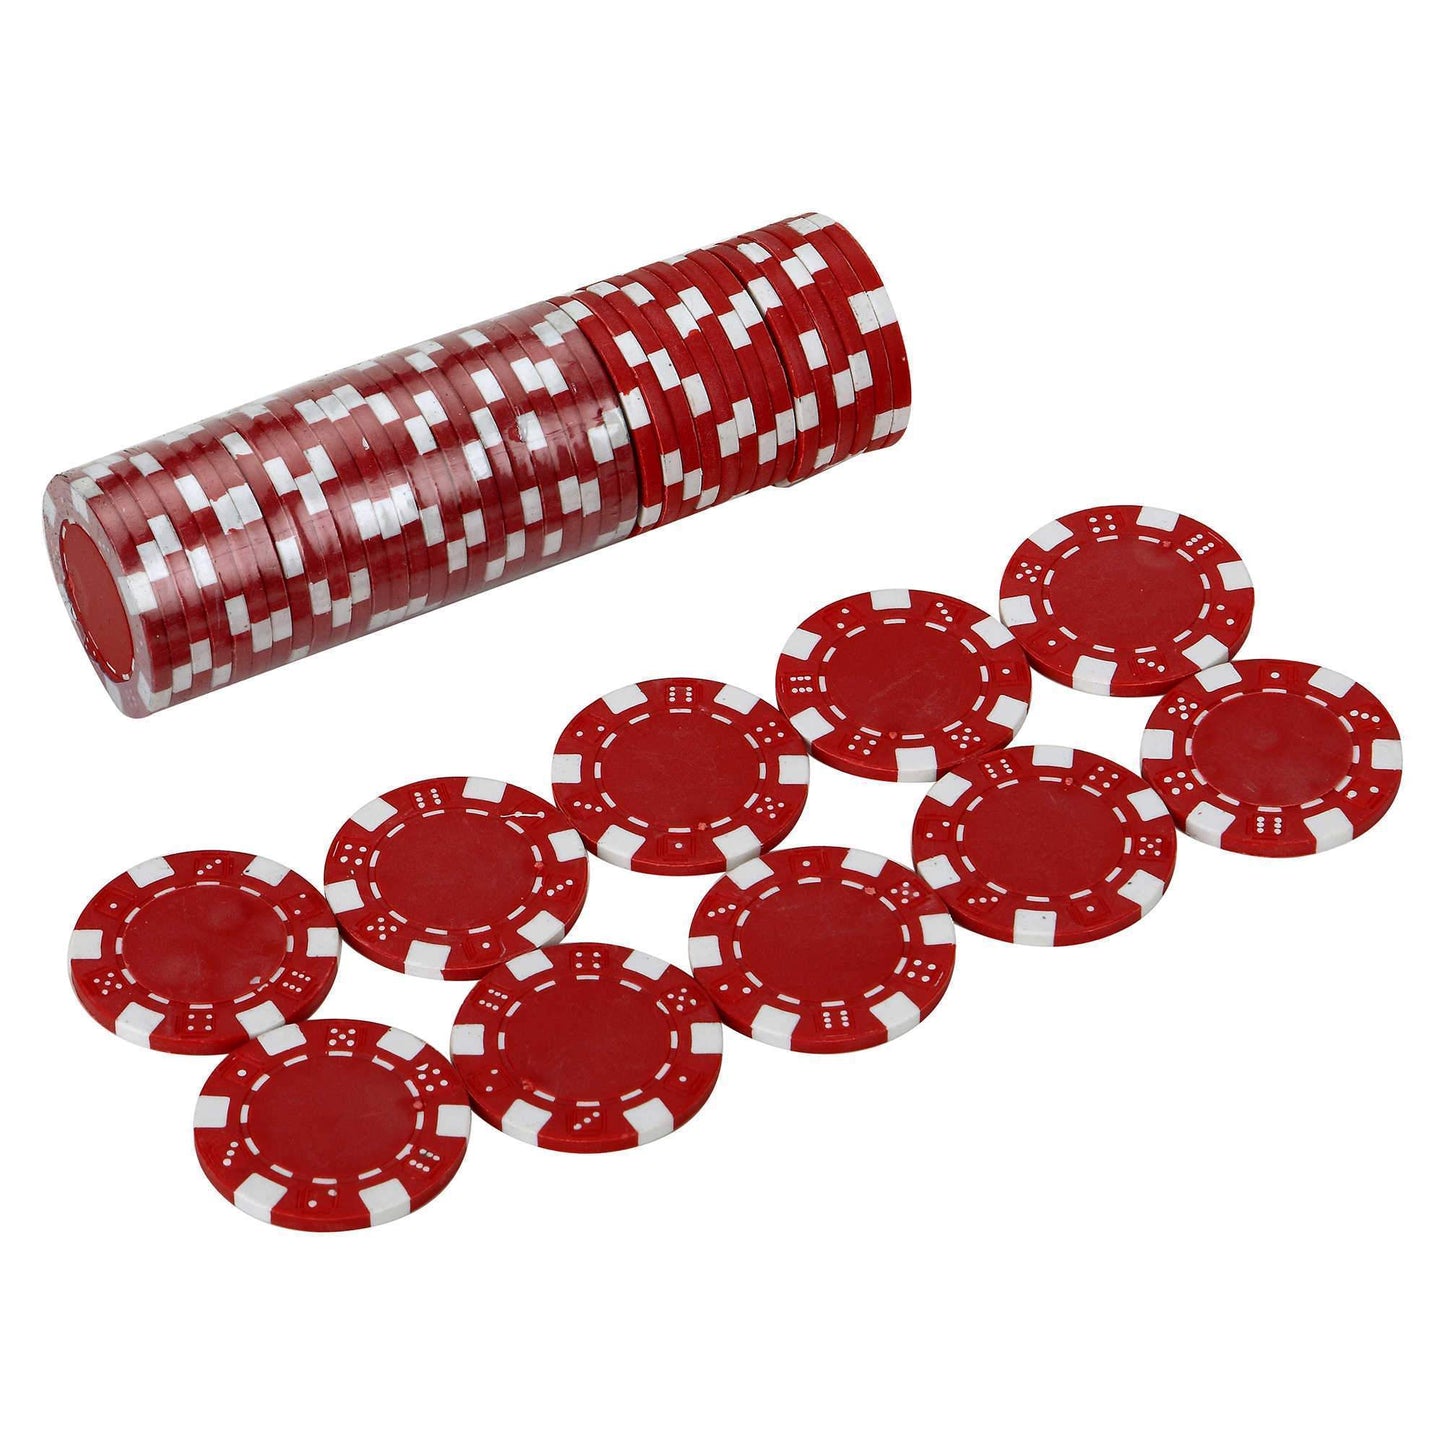 Hathaway Monte Carlo 500 Piece Poker Chips Set Clay 11 Grams - Just Poker Tables